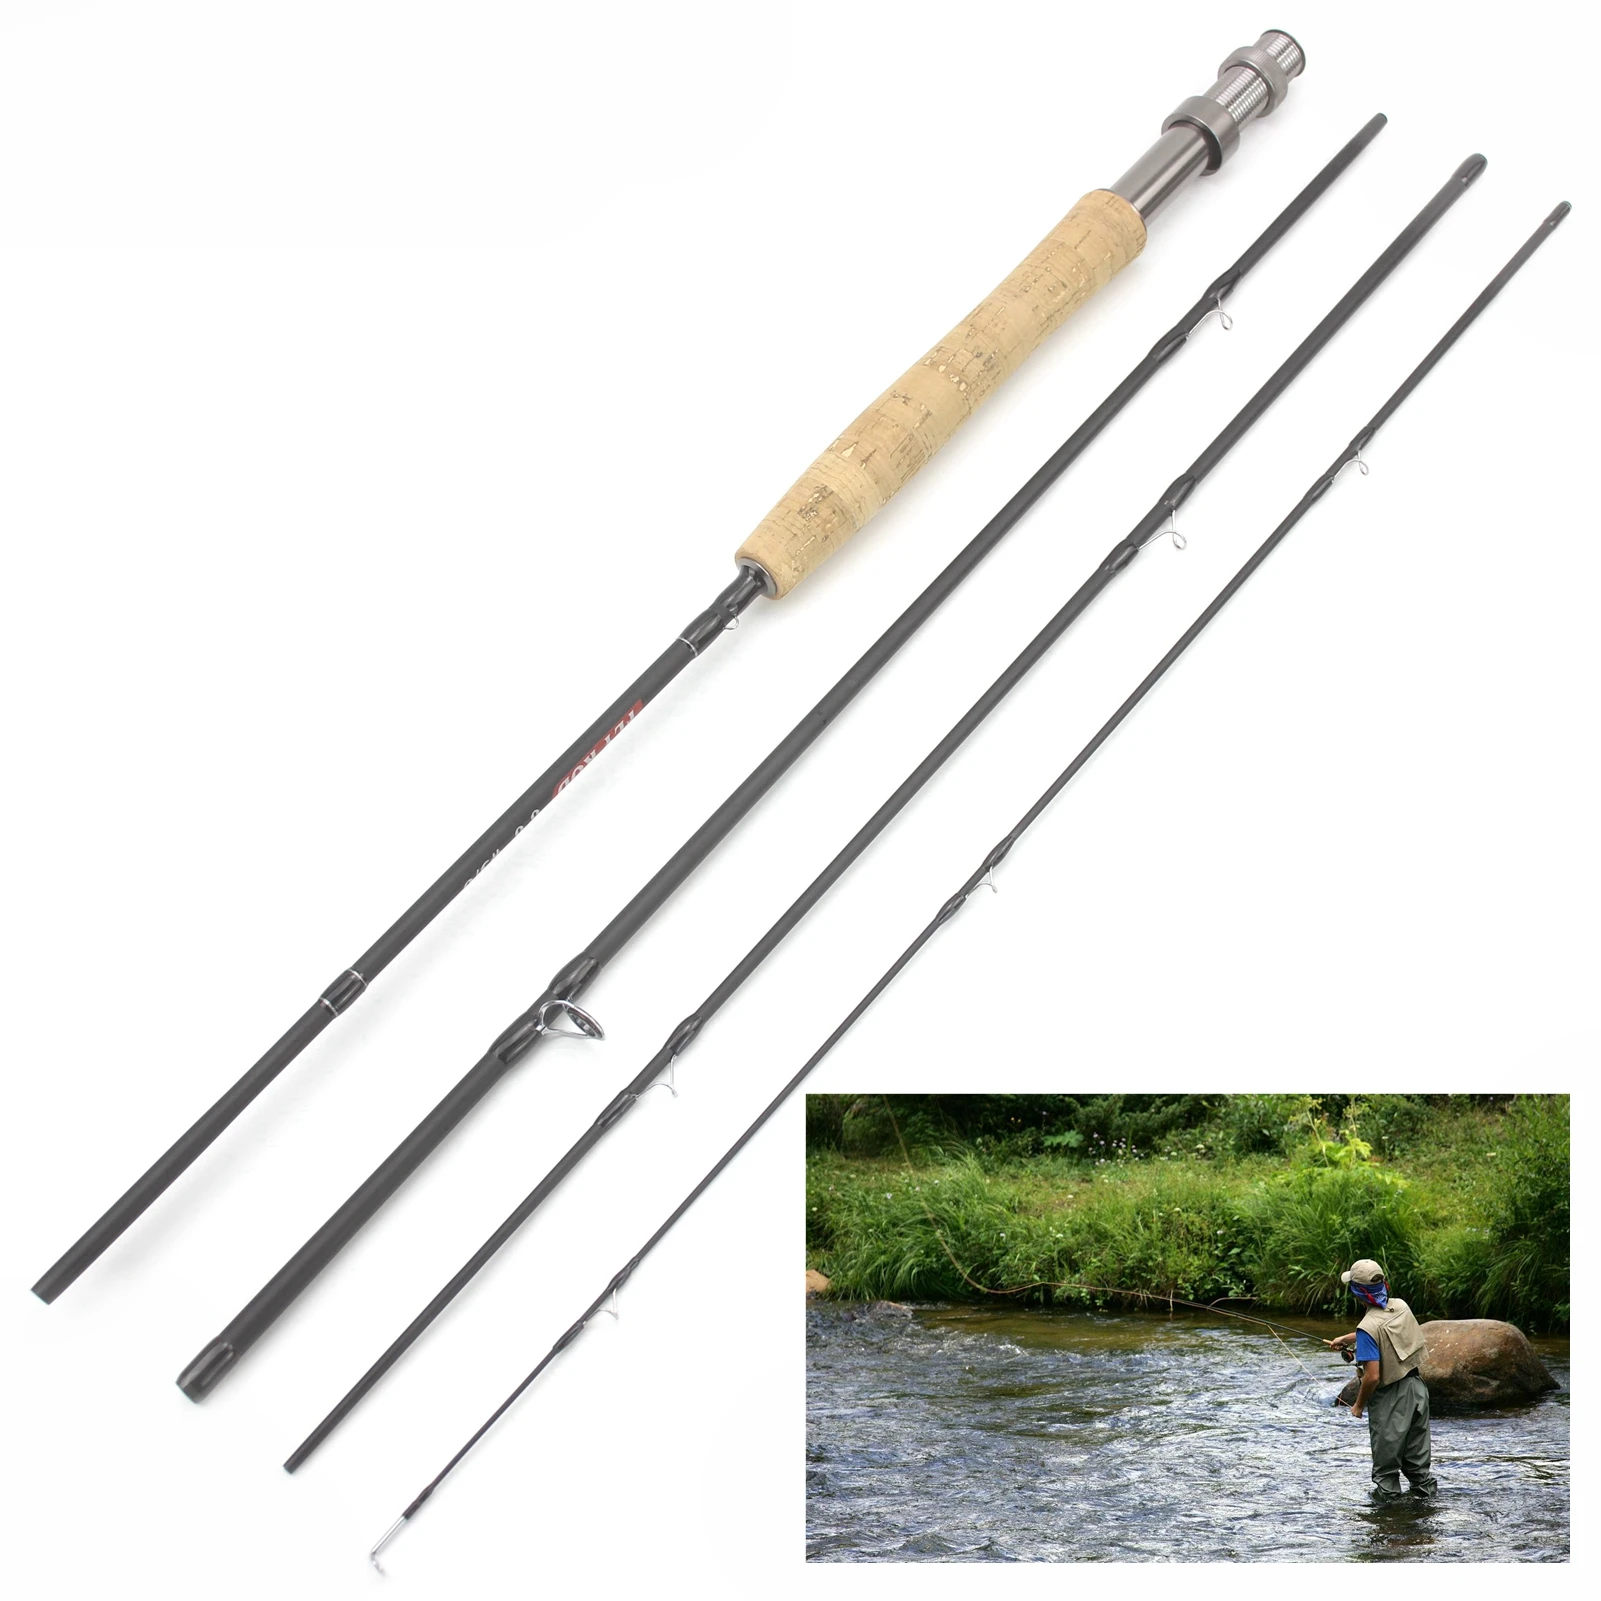 https://ae01.alicdn.com/kf/S02b8df0e8bb2440bbba9dd1873bc752bu/NEW-2-1M-7FT-Fly-Fishing-Rod-King-Fisher-Carbon-Fiber-Ultralight-Weight-Fly-Fishing-Rod.jpg